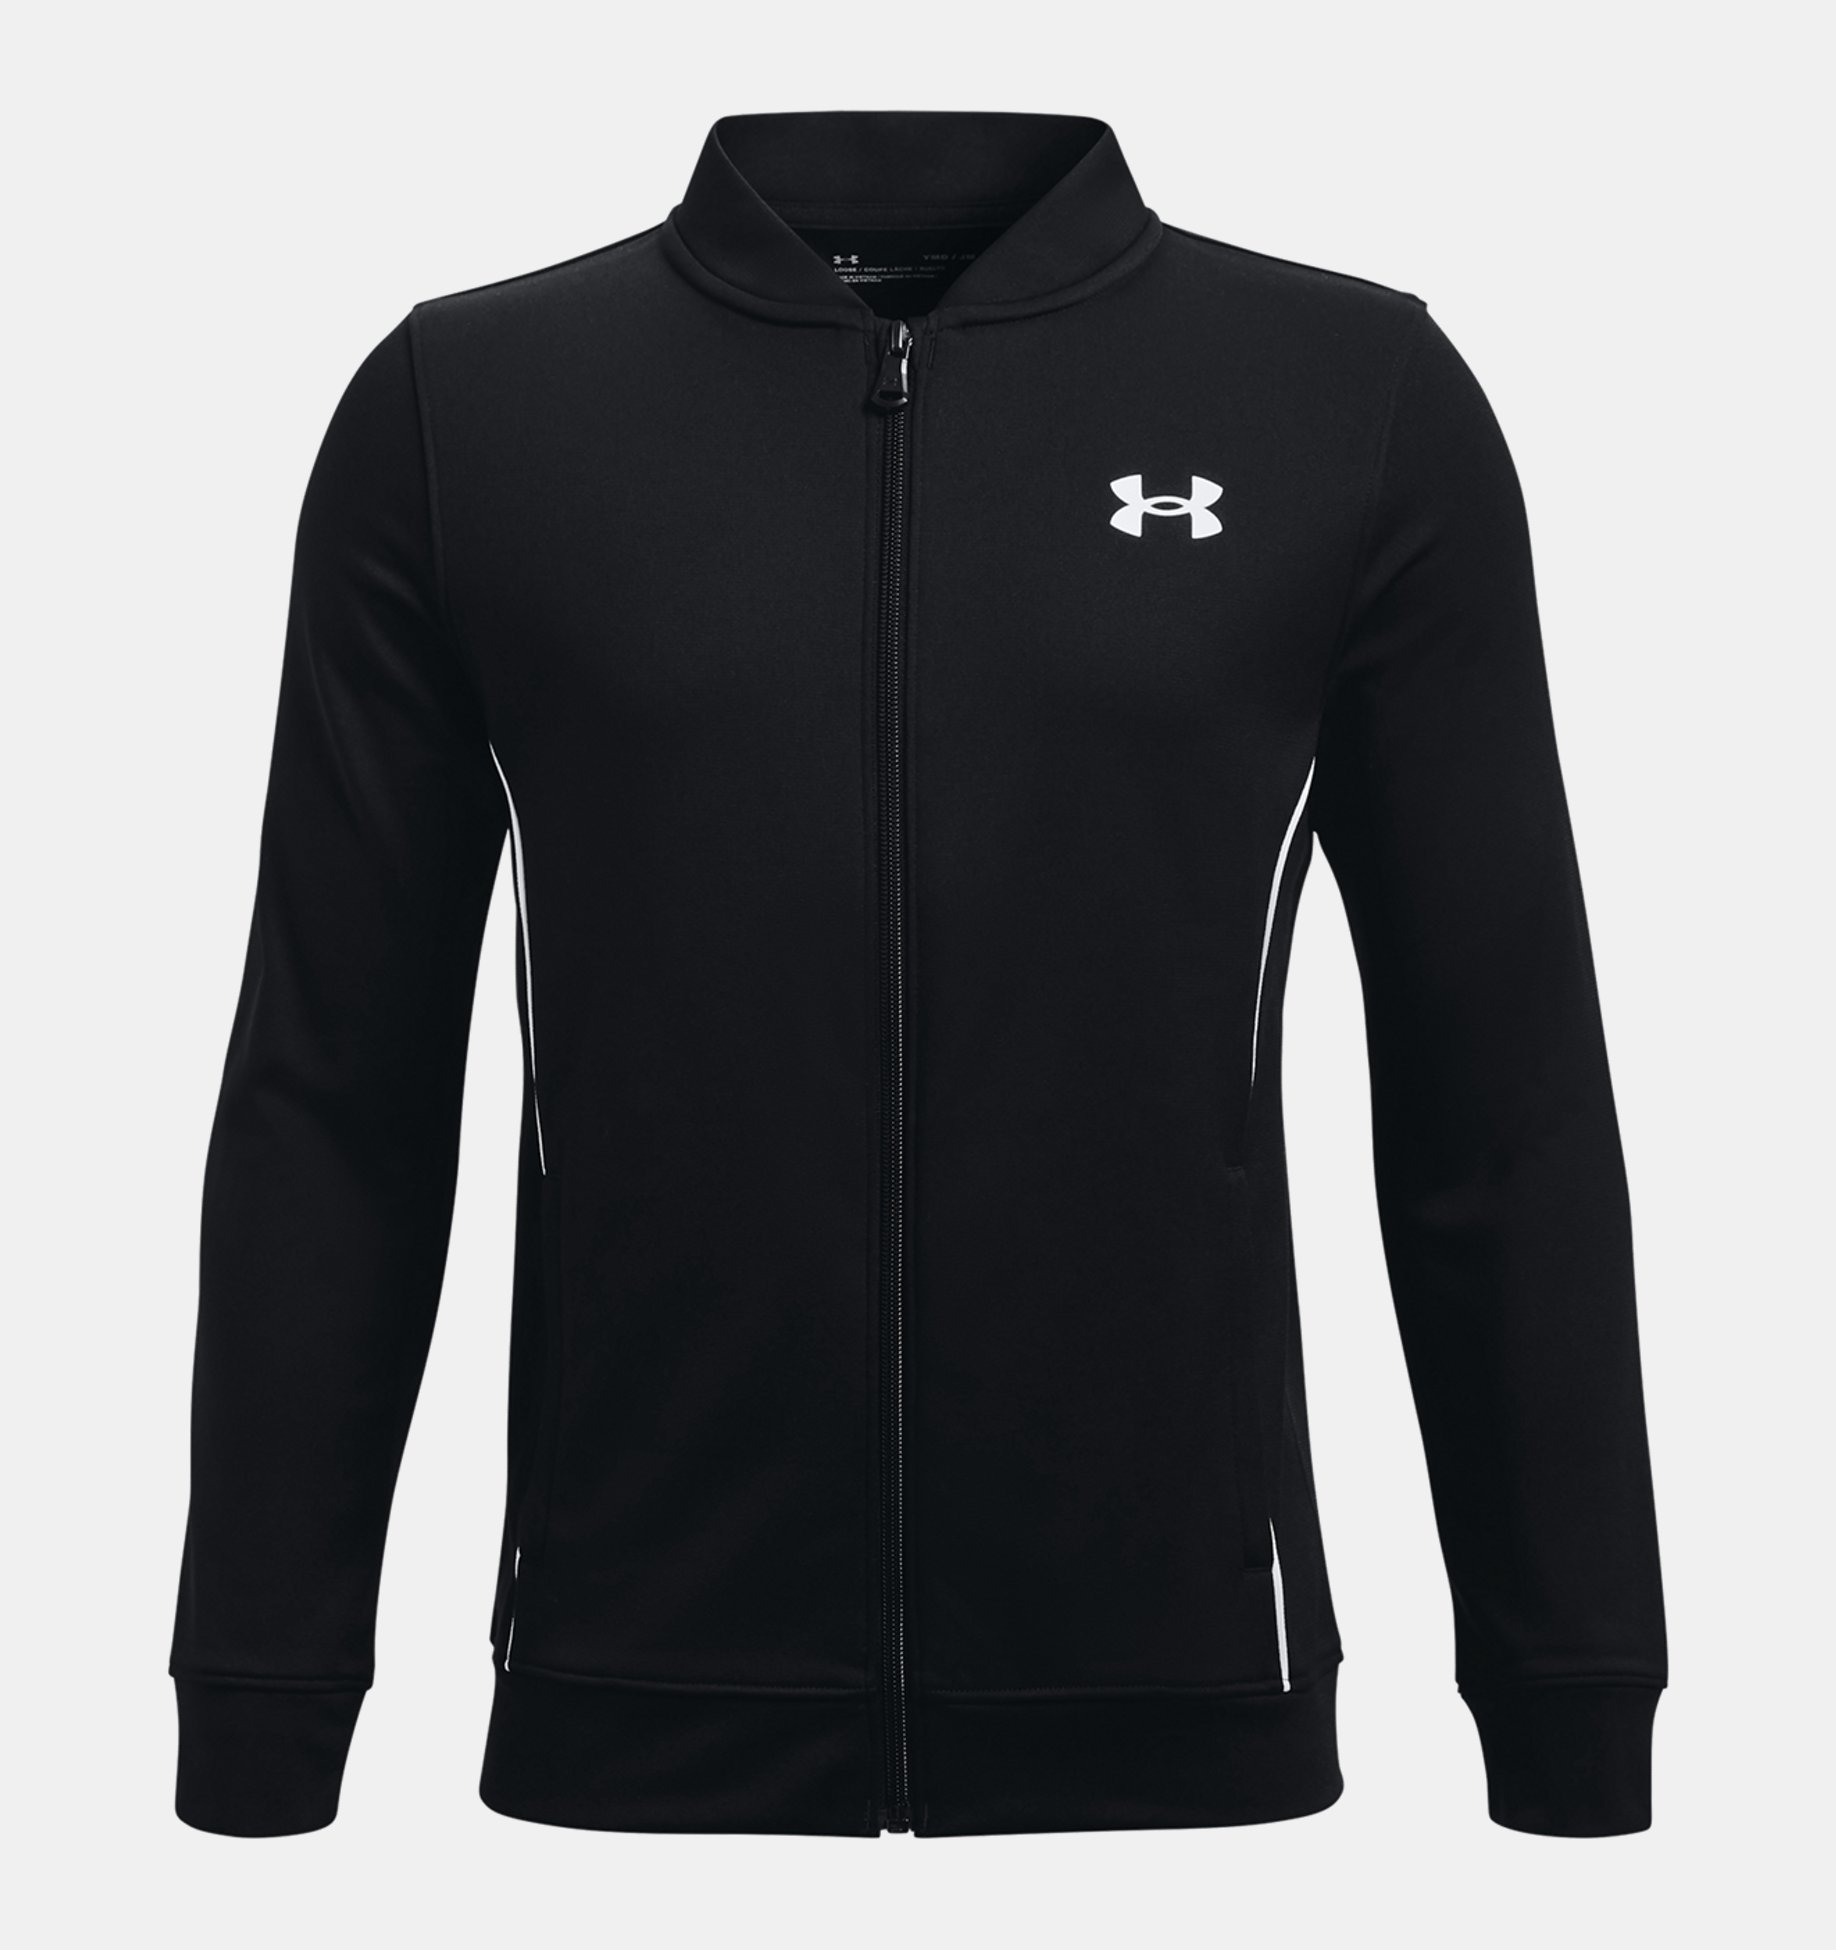 Under Armour Kids UA Pennant Jacket 2.0 Warm-up Top